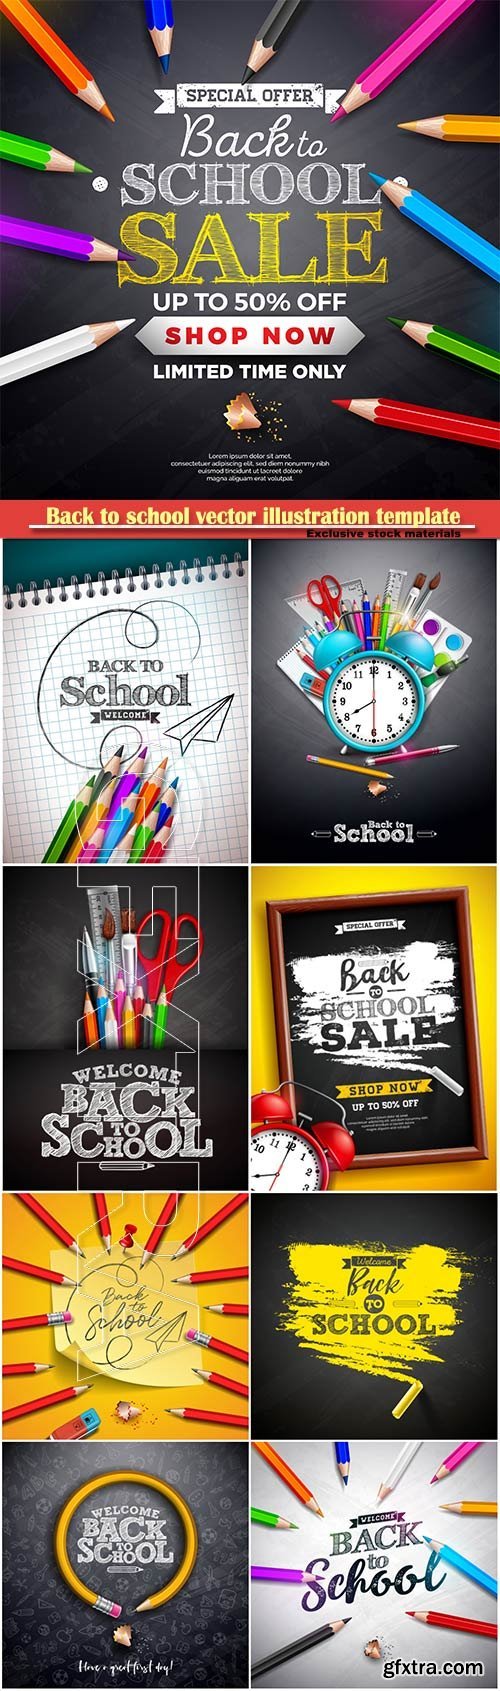 Back to school vector illustration template # 14